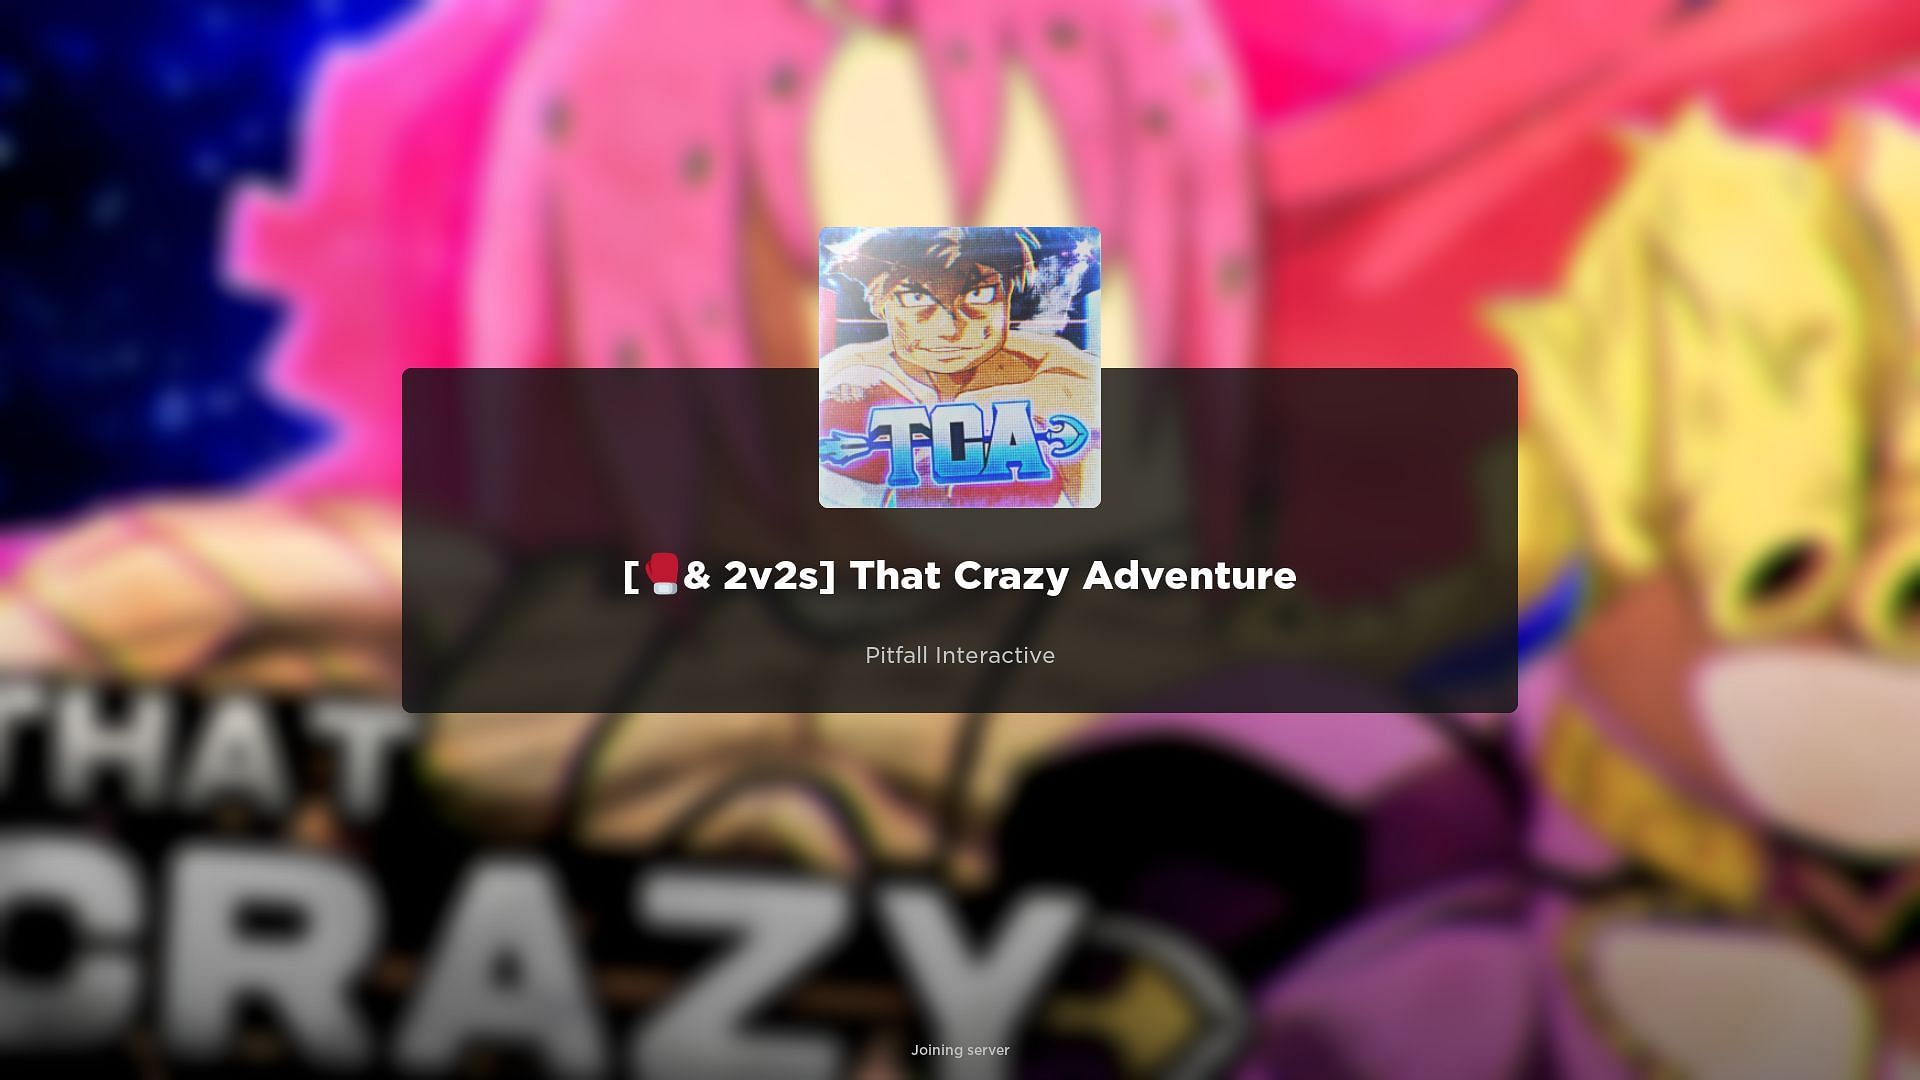 Updated] Anime Adventures Codes: January 2023 » Gaming Guide, anime  adventures codes 2023 - thirstymag.com